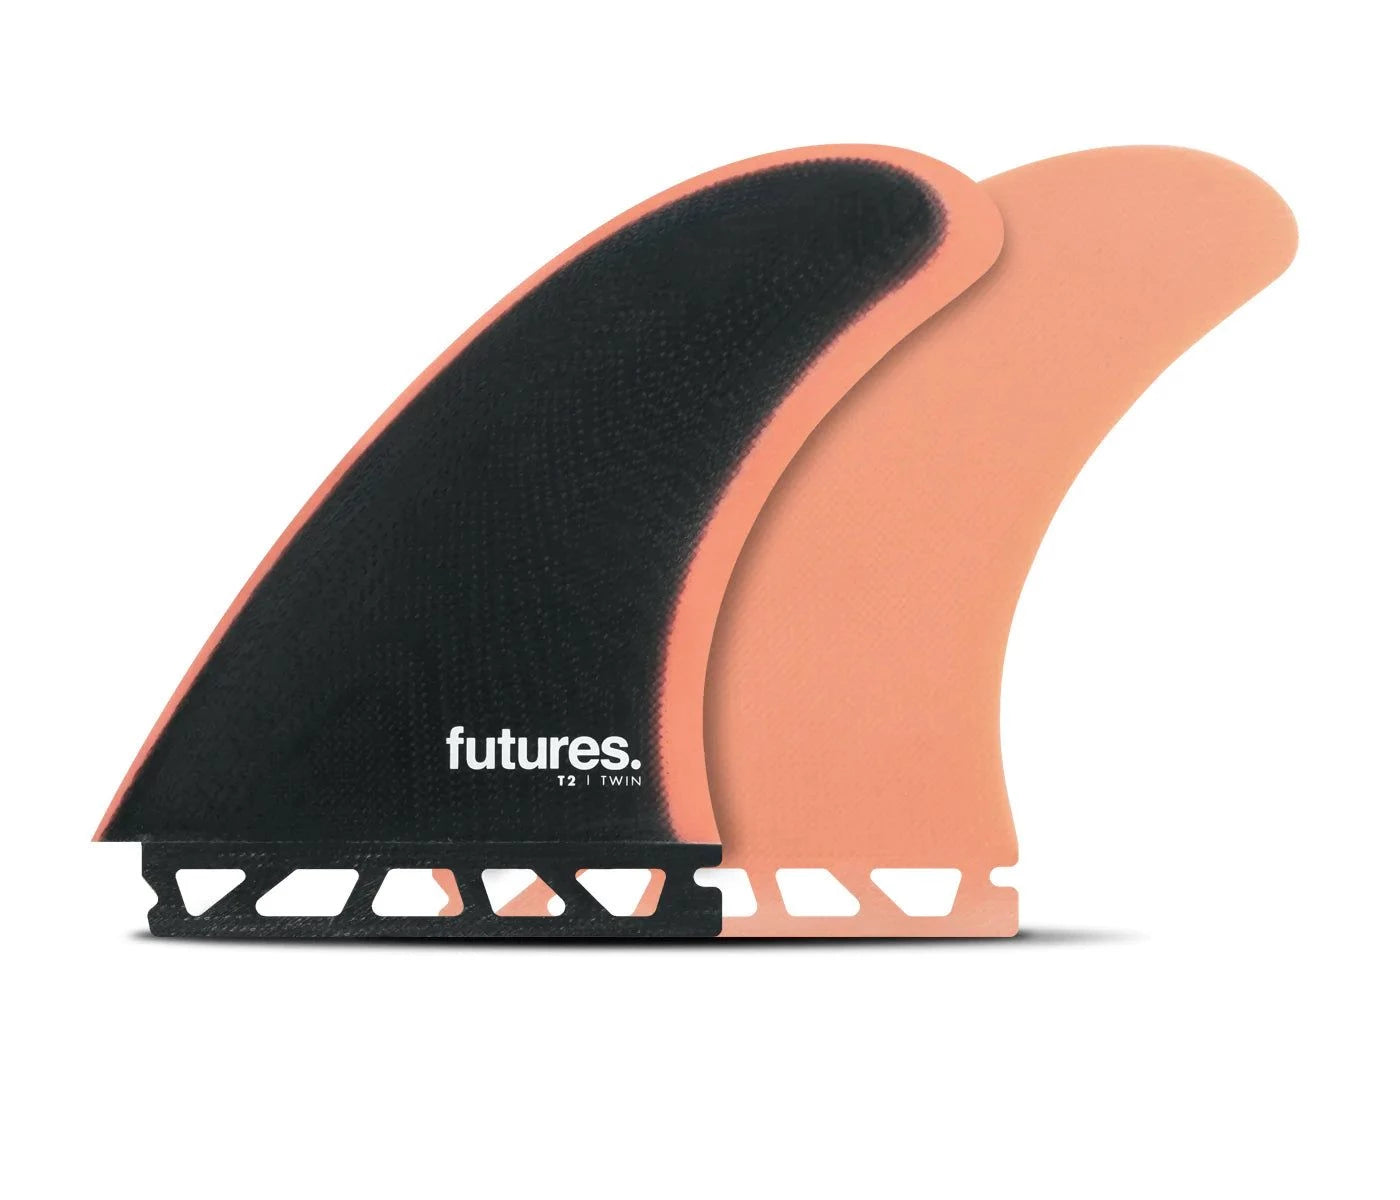 Futures T2 Twin-Futures-fins,futures,surfboard,twin fin